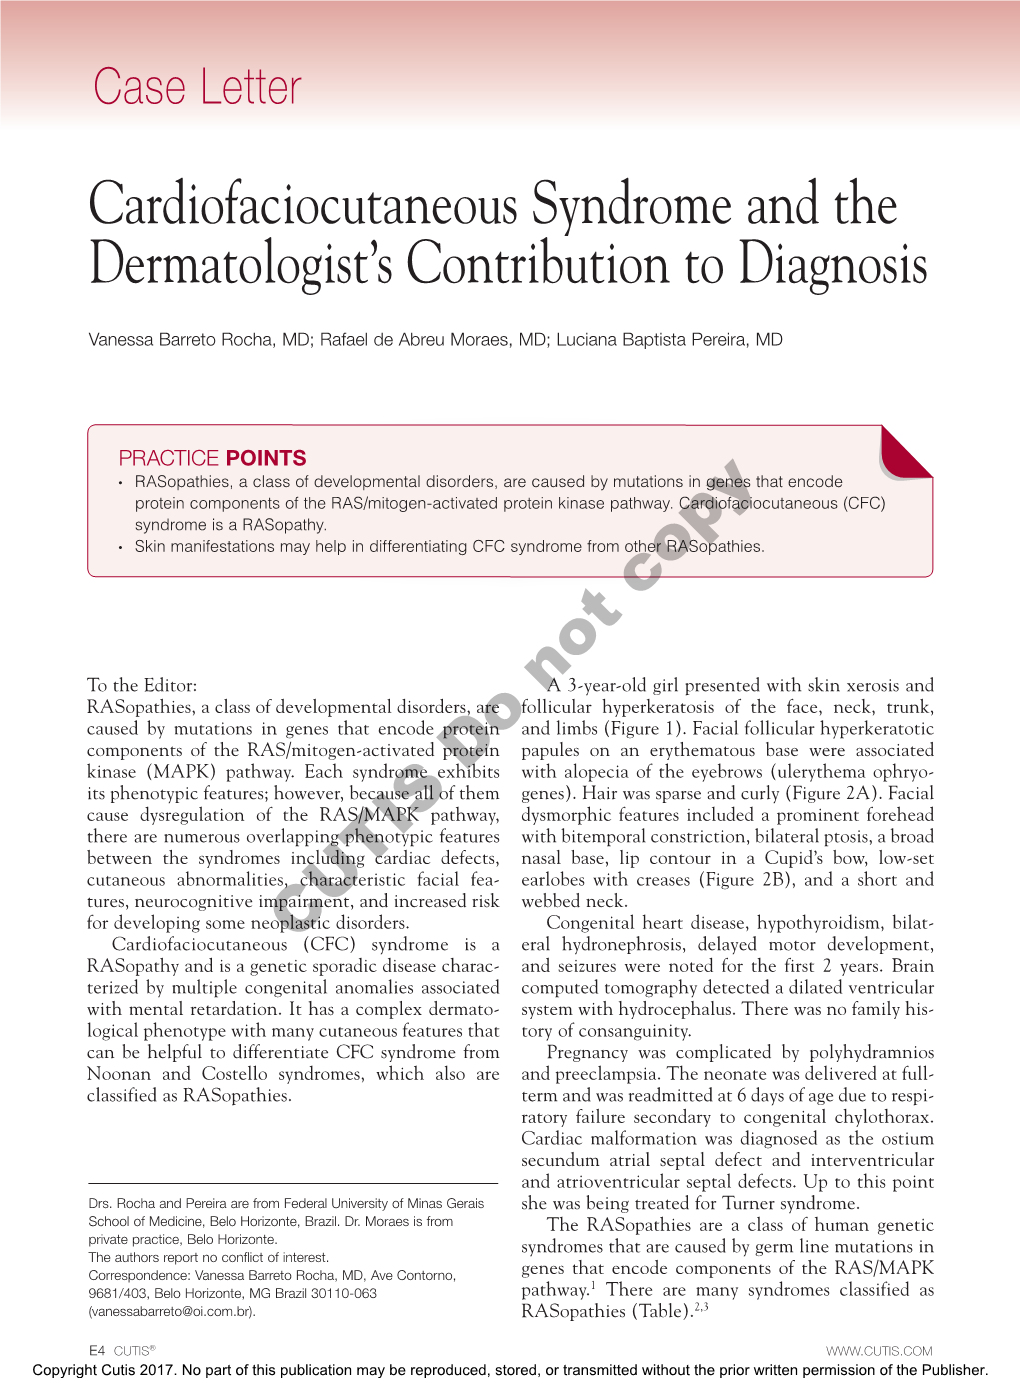 Cardiofaciocutaneous Syndrome and the Dermatologist's Contribution To